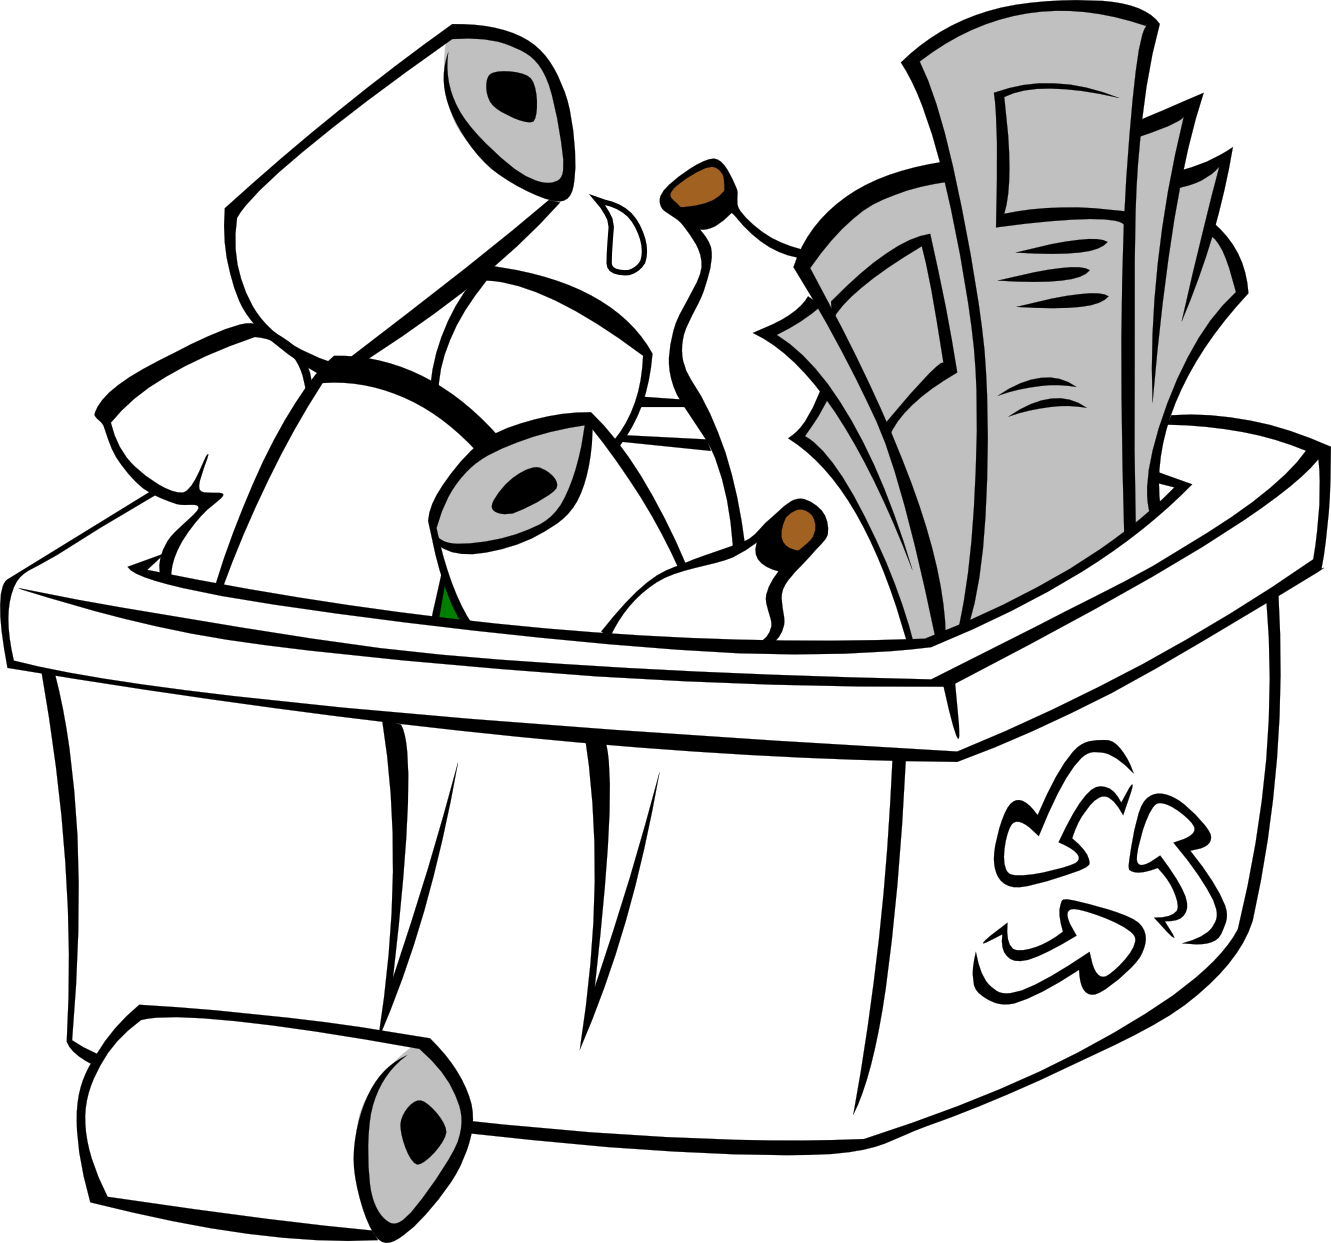 Dust clipart black and white. Recycling free download best